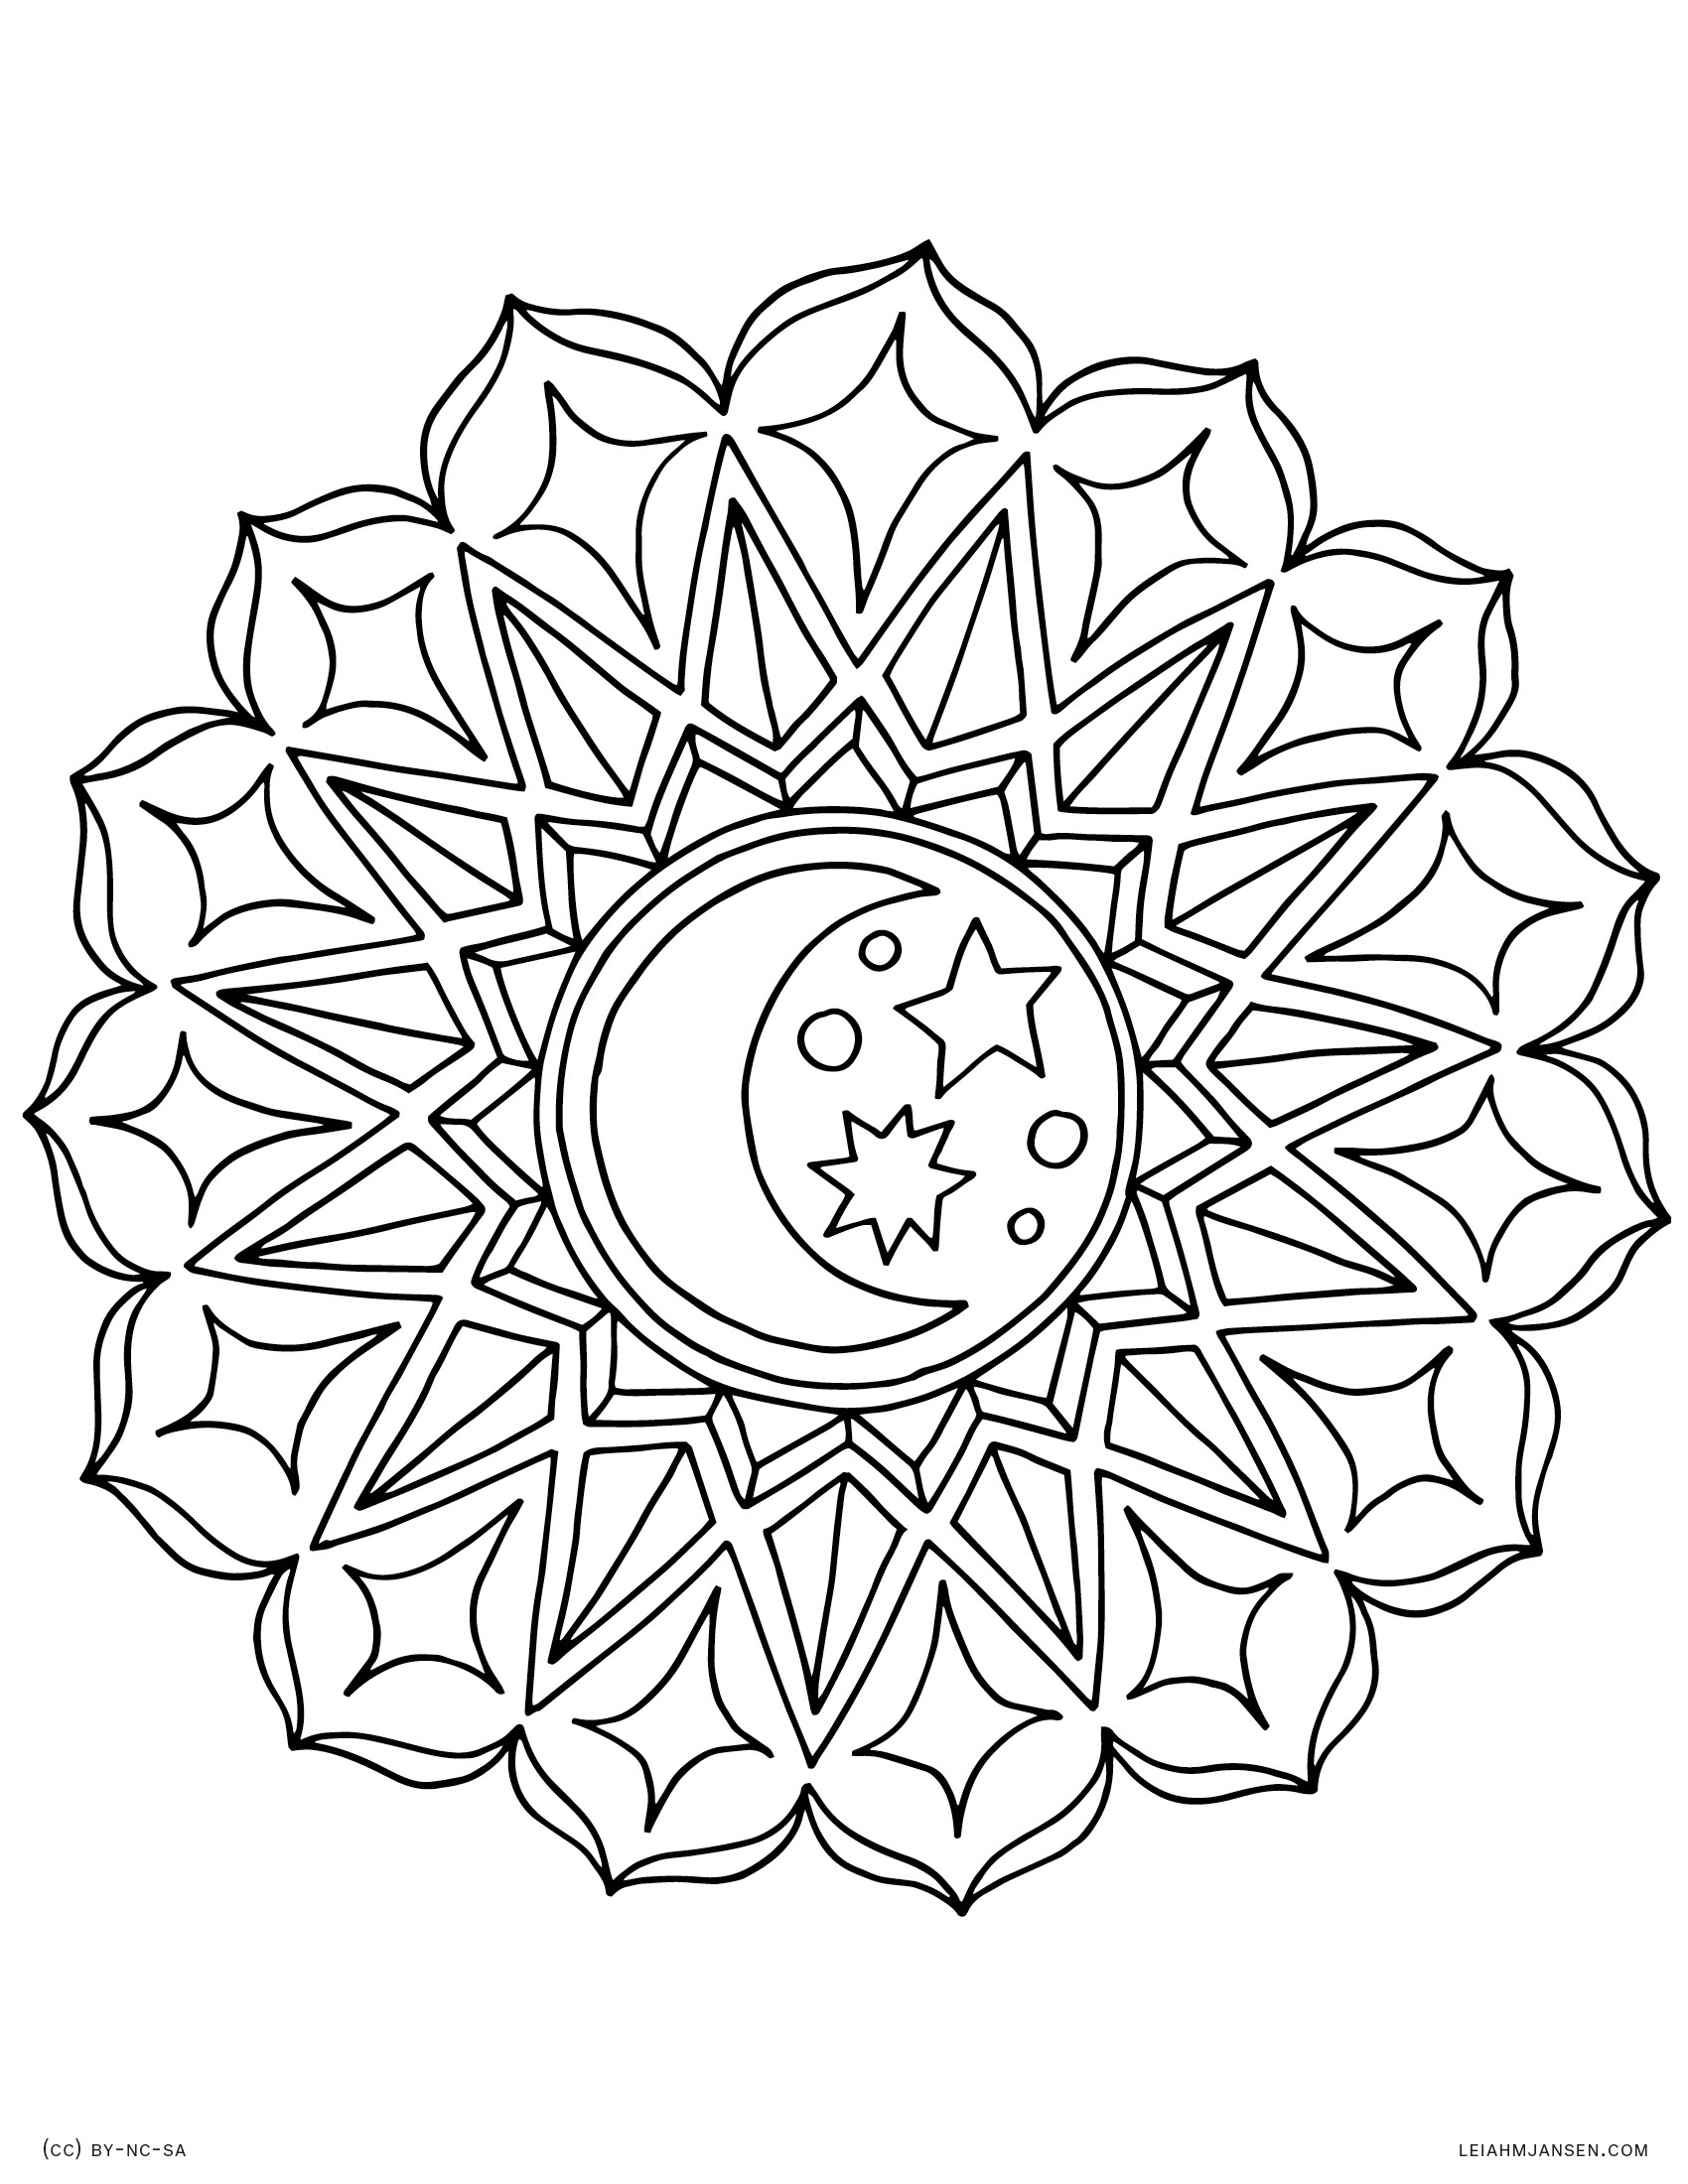 Coloring Pages - Free Printable Mandala Coloring Pages For Adults